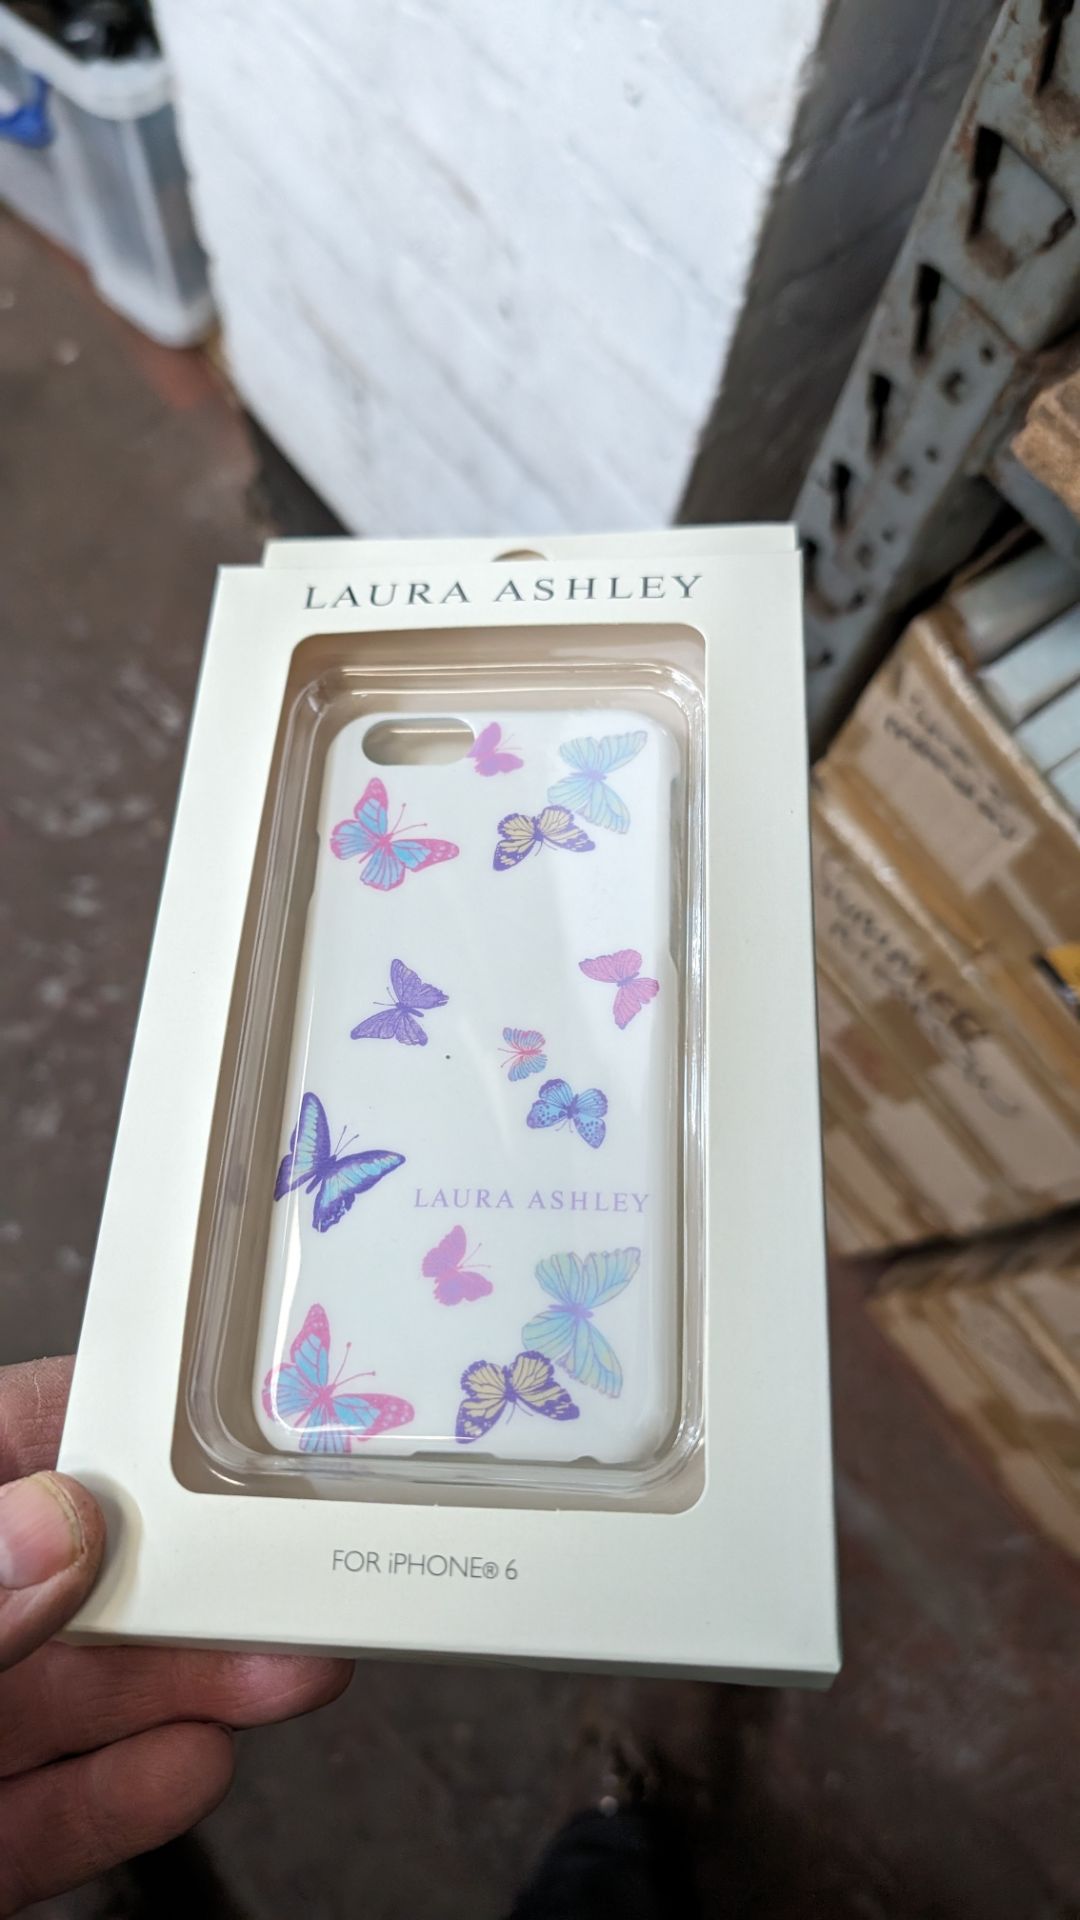 Large quantity of Laura Ashley iPhone covers/cases for iPhone 6 in several different designs - 10 la - Bild 3 aus 4